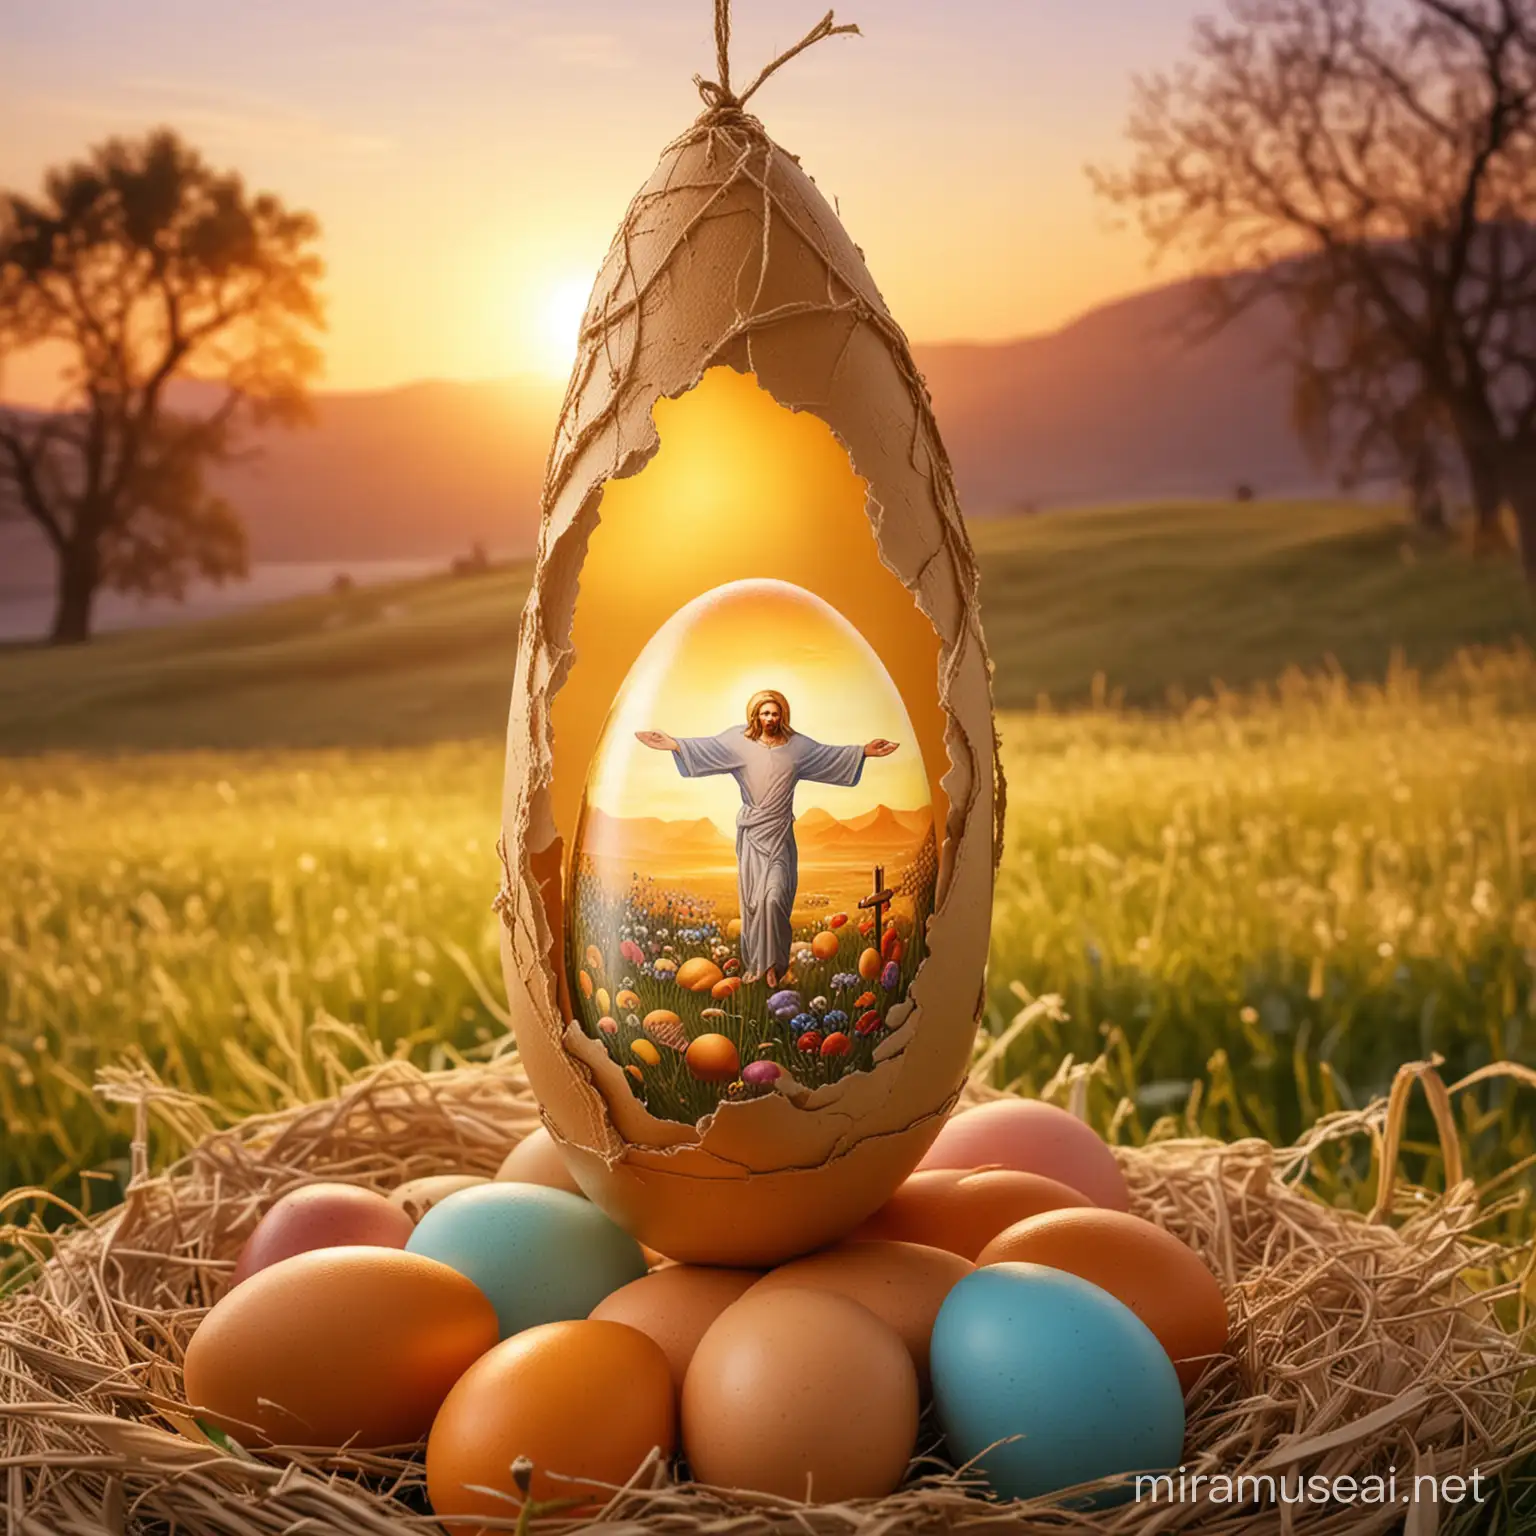 Spring Meadow Easter Celebration with Colorful Eggs and Hanged Jesus Image